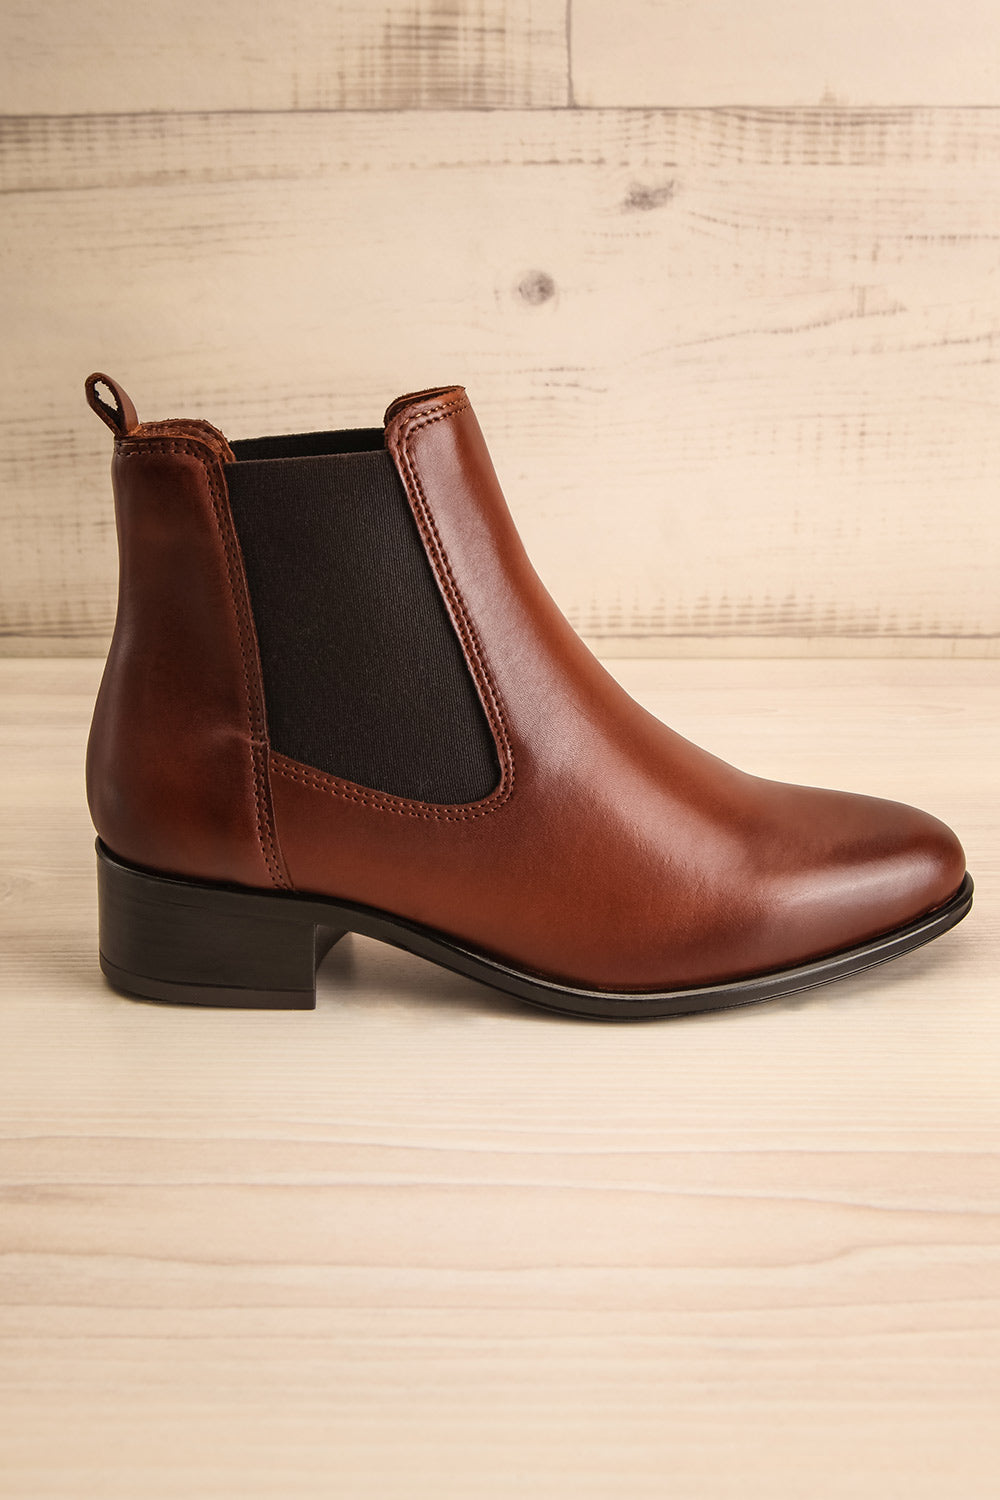 Bobby Brown Leather Heeled Ankle Boots | La Petite Garçonne side view